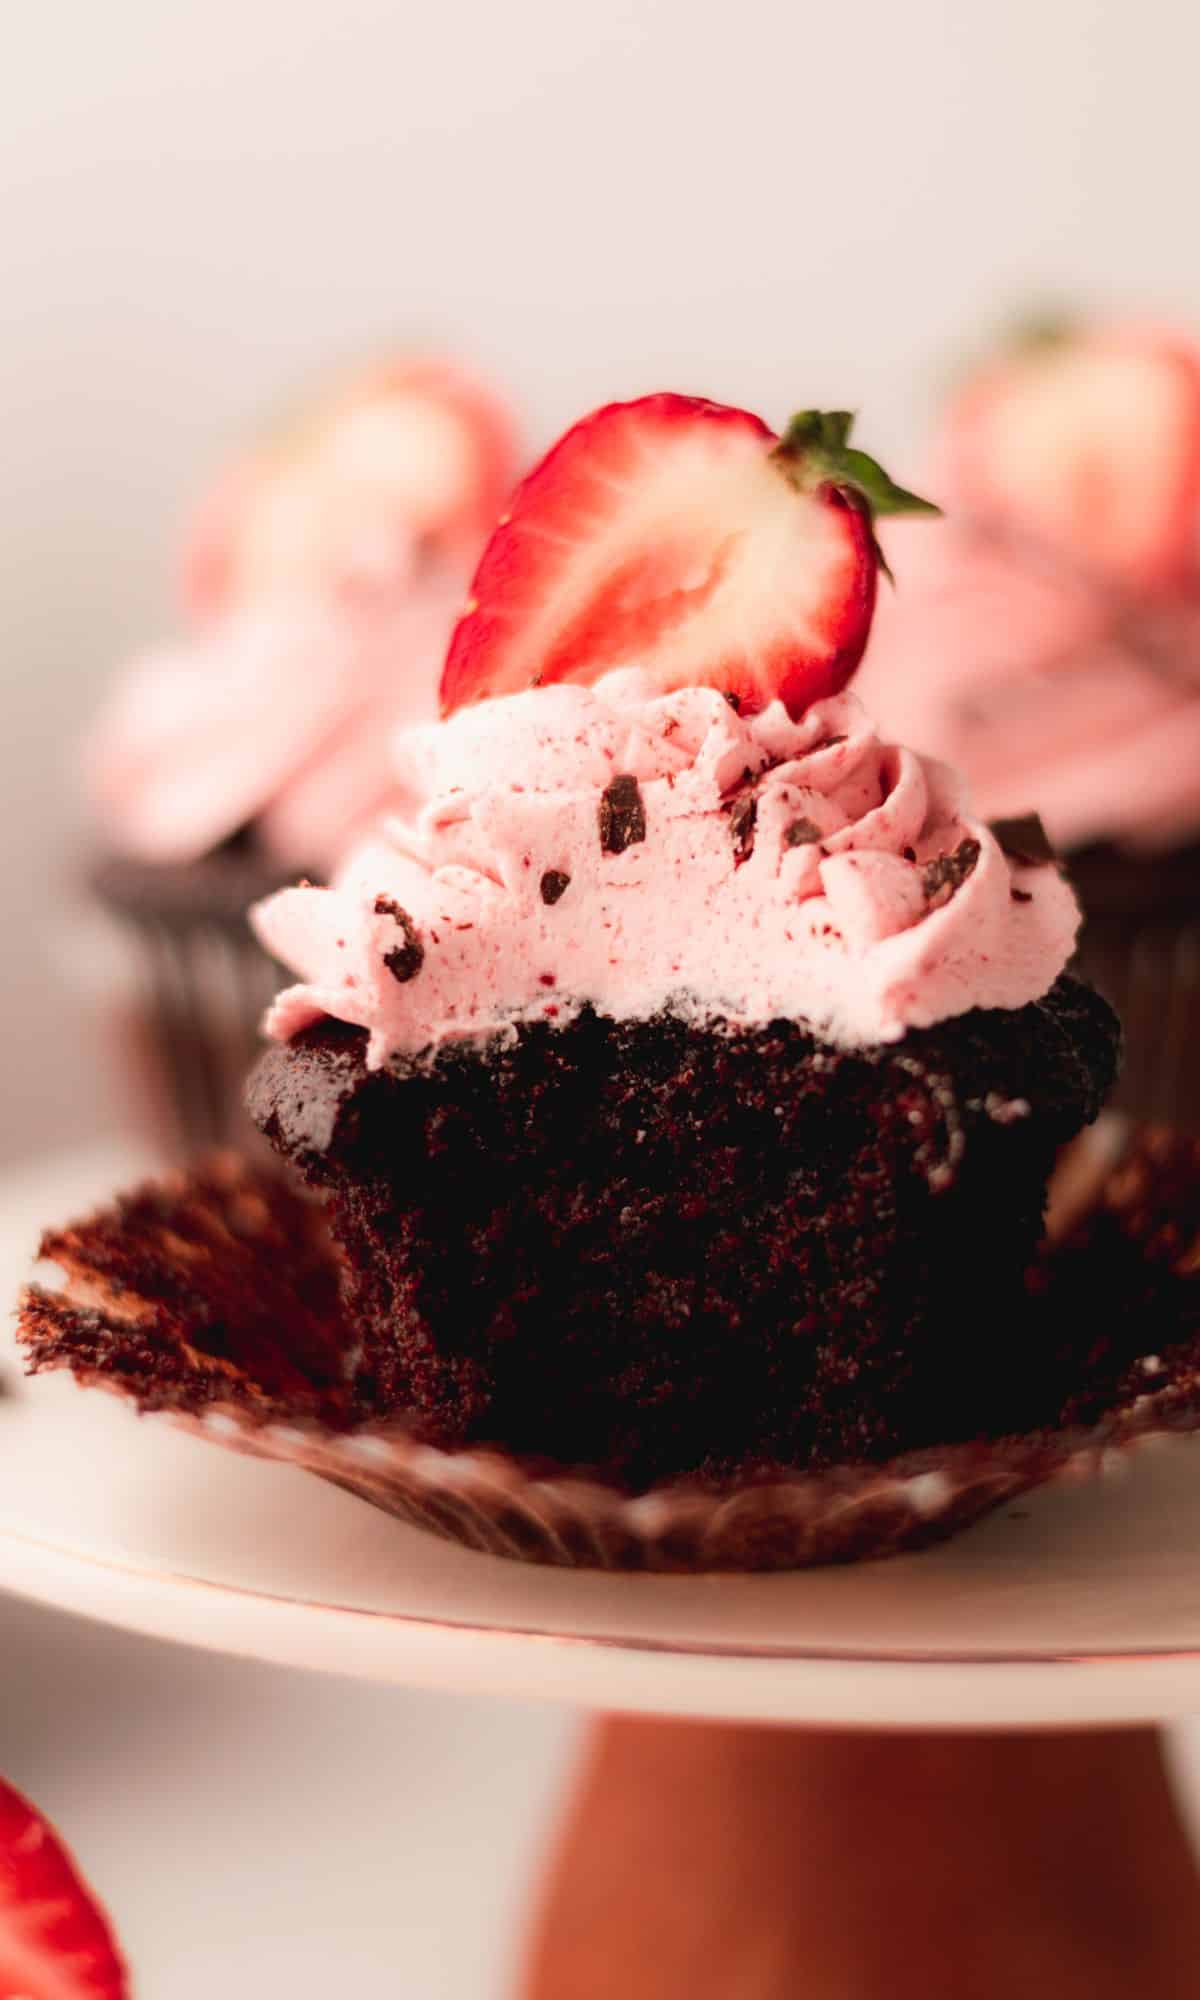 Chocolate cupcake with strawberry buttercream and a halved strawberry on top and a bite taken.